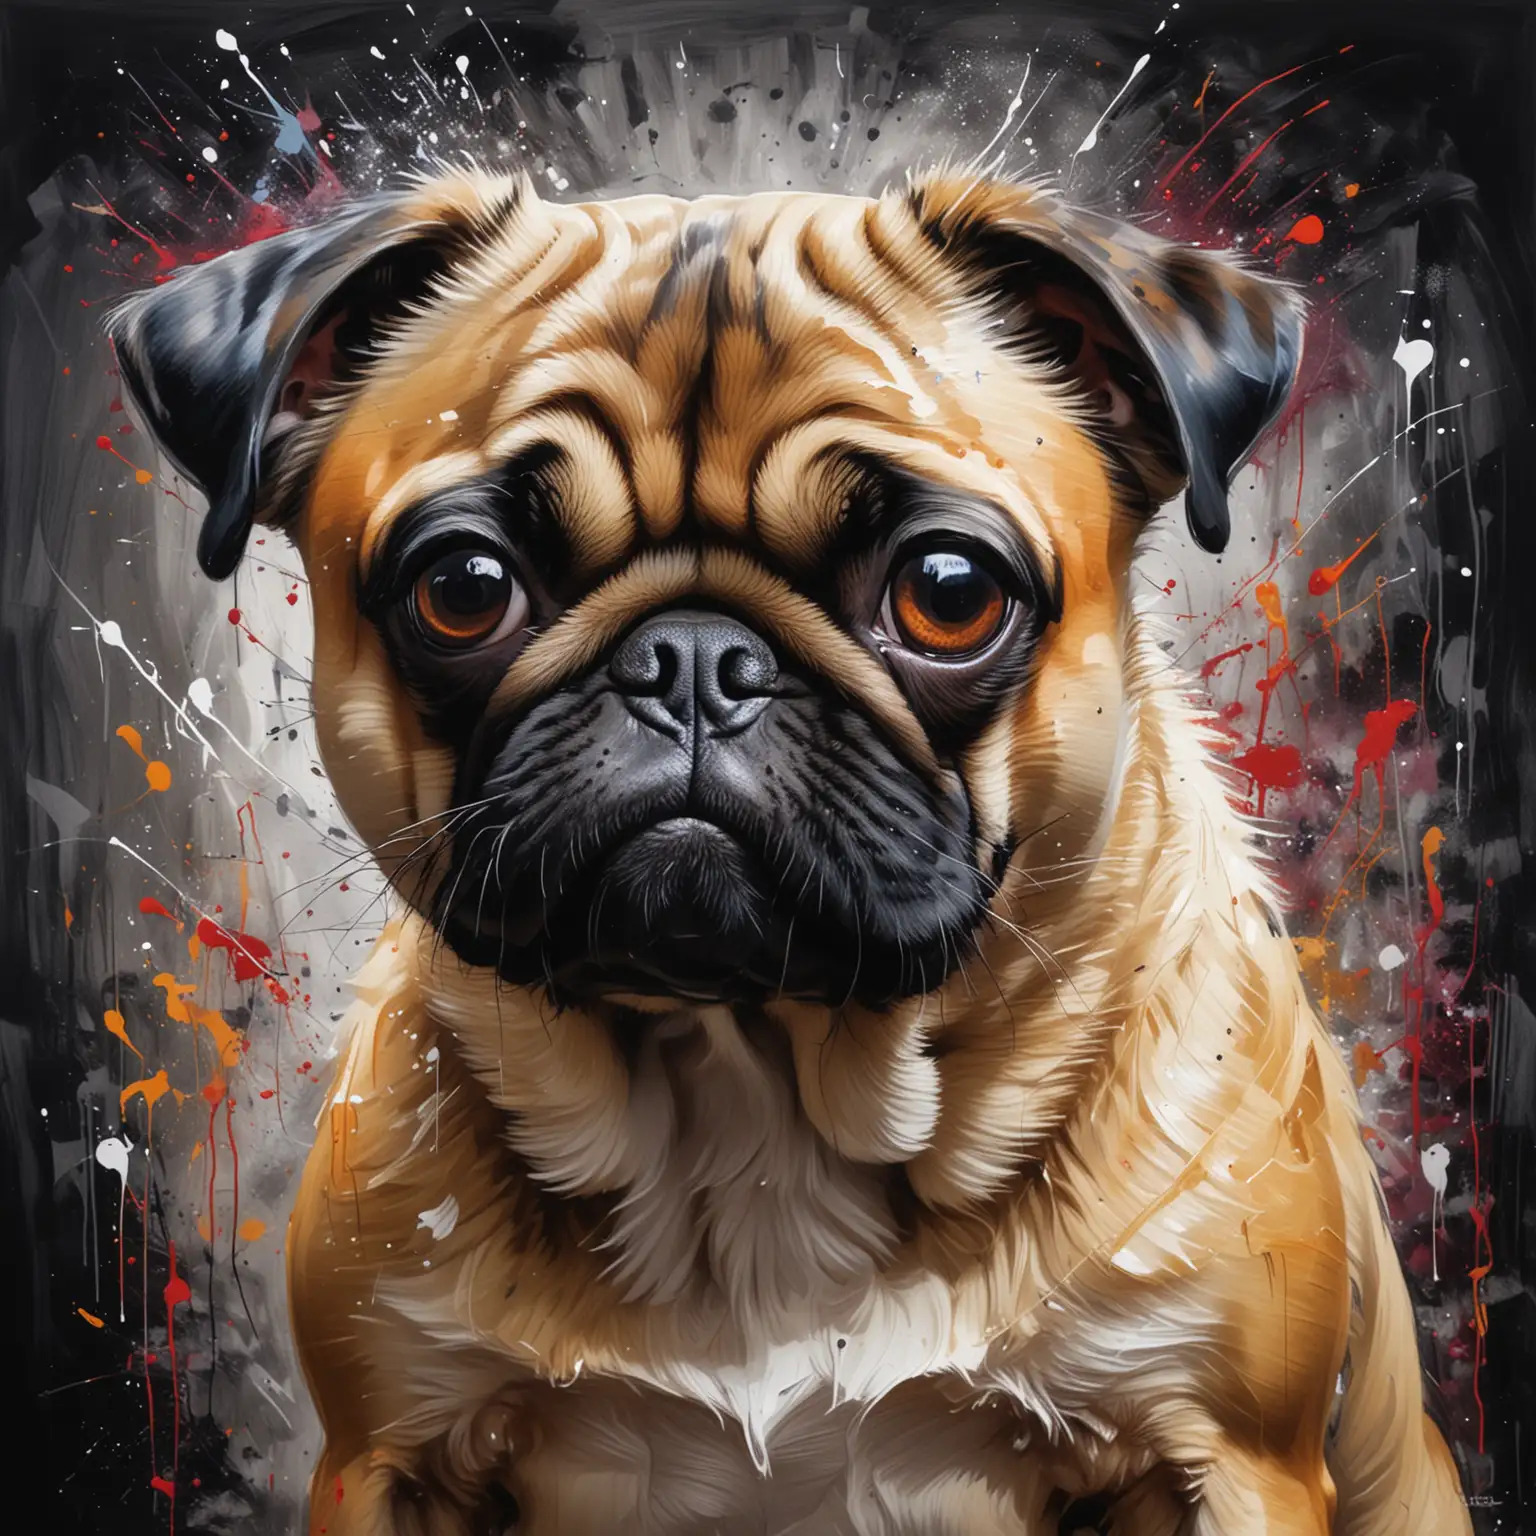 Neo-expressionist style of a fawn pug depicted with bold, exaggerated forms, impulsive brushwork, dramatic alcohol effects, bold, energetic, confrontational.